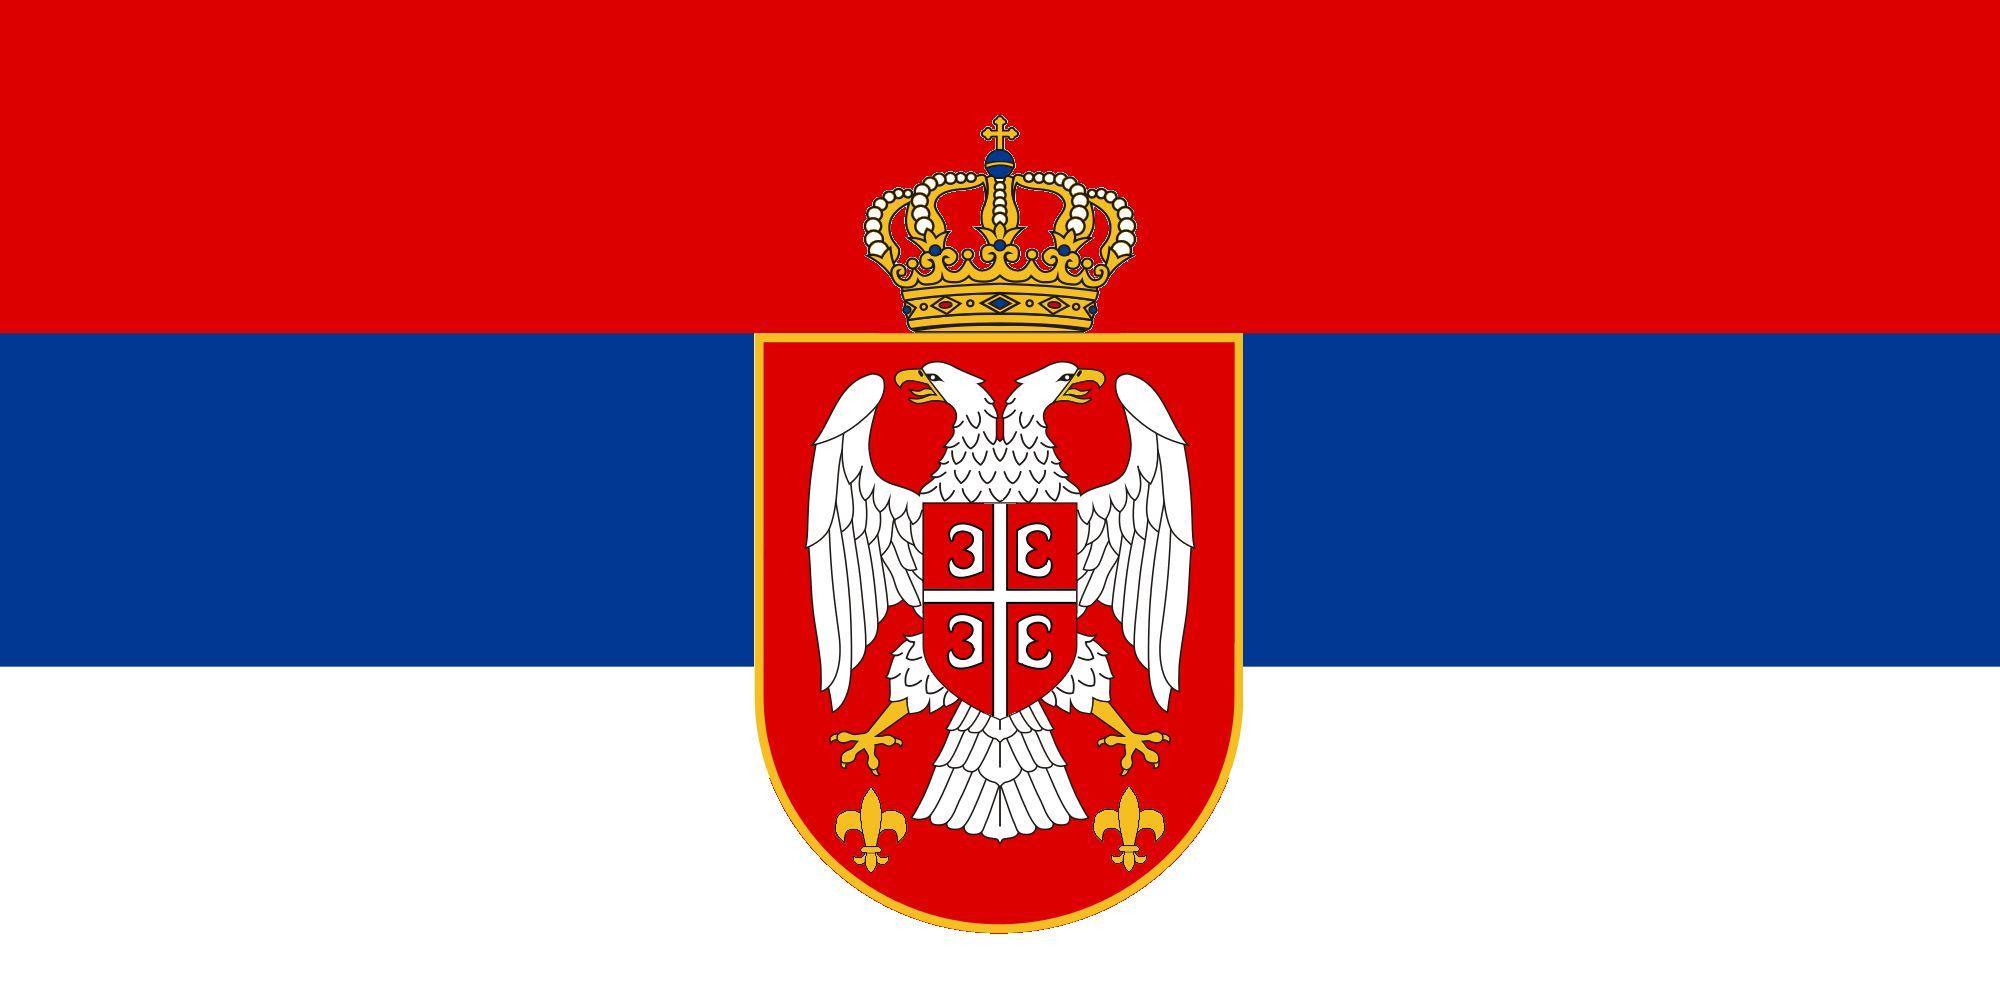 Serbia Flag Wallpapers for Android - APK Download